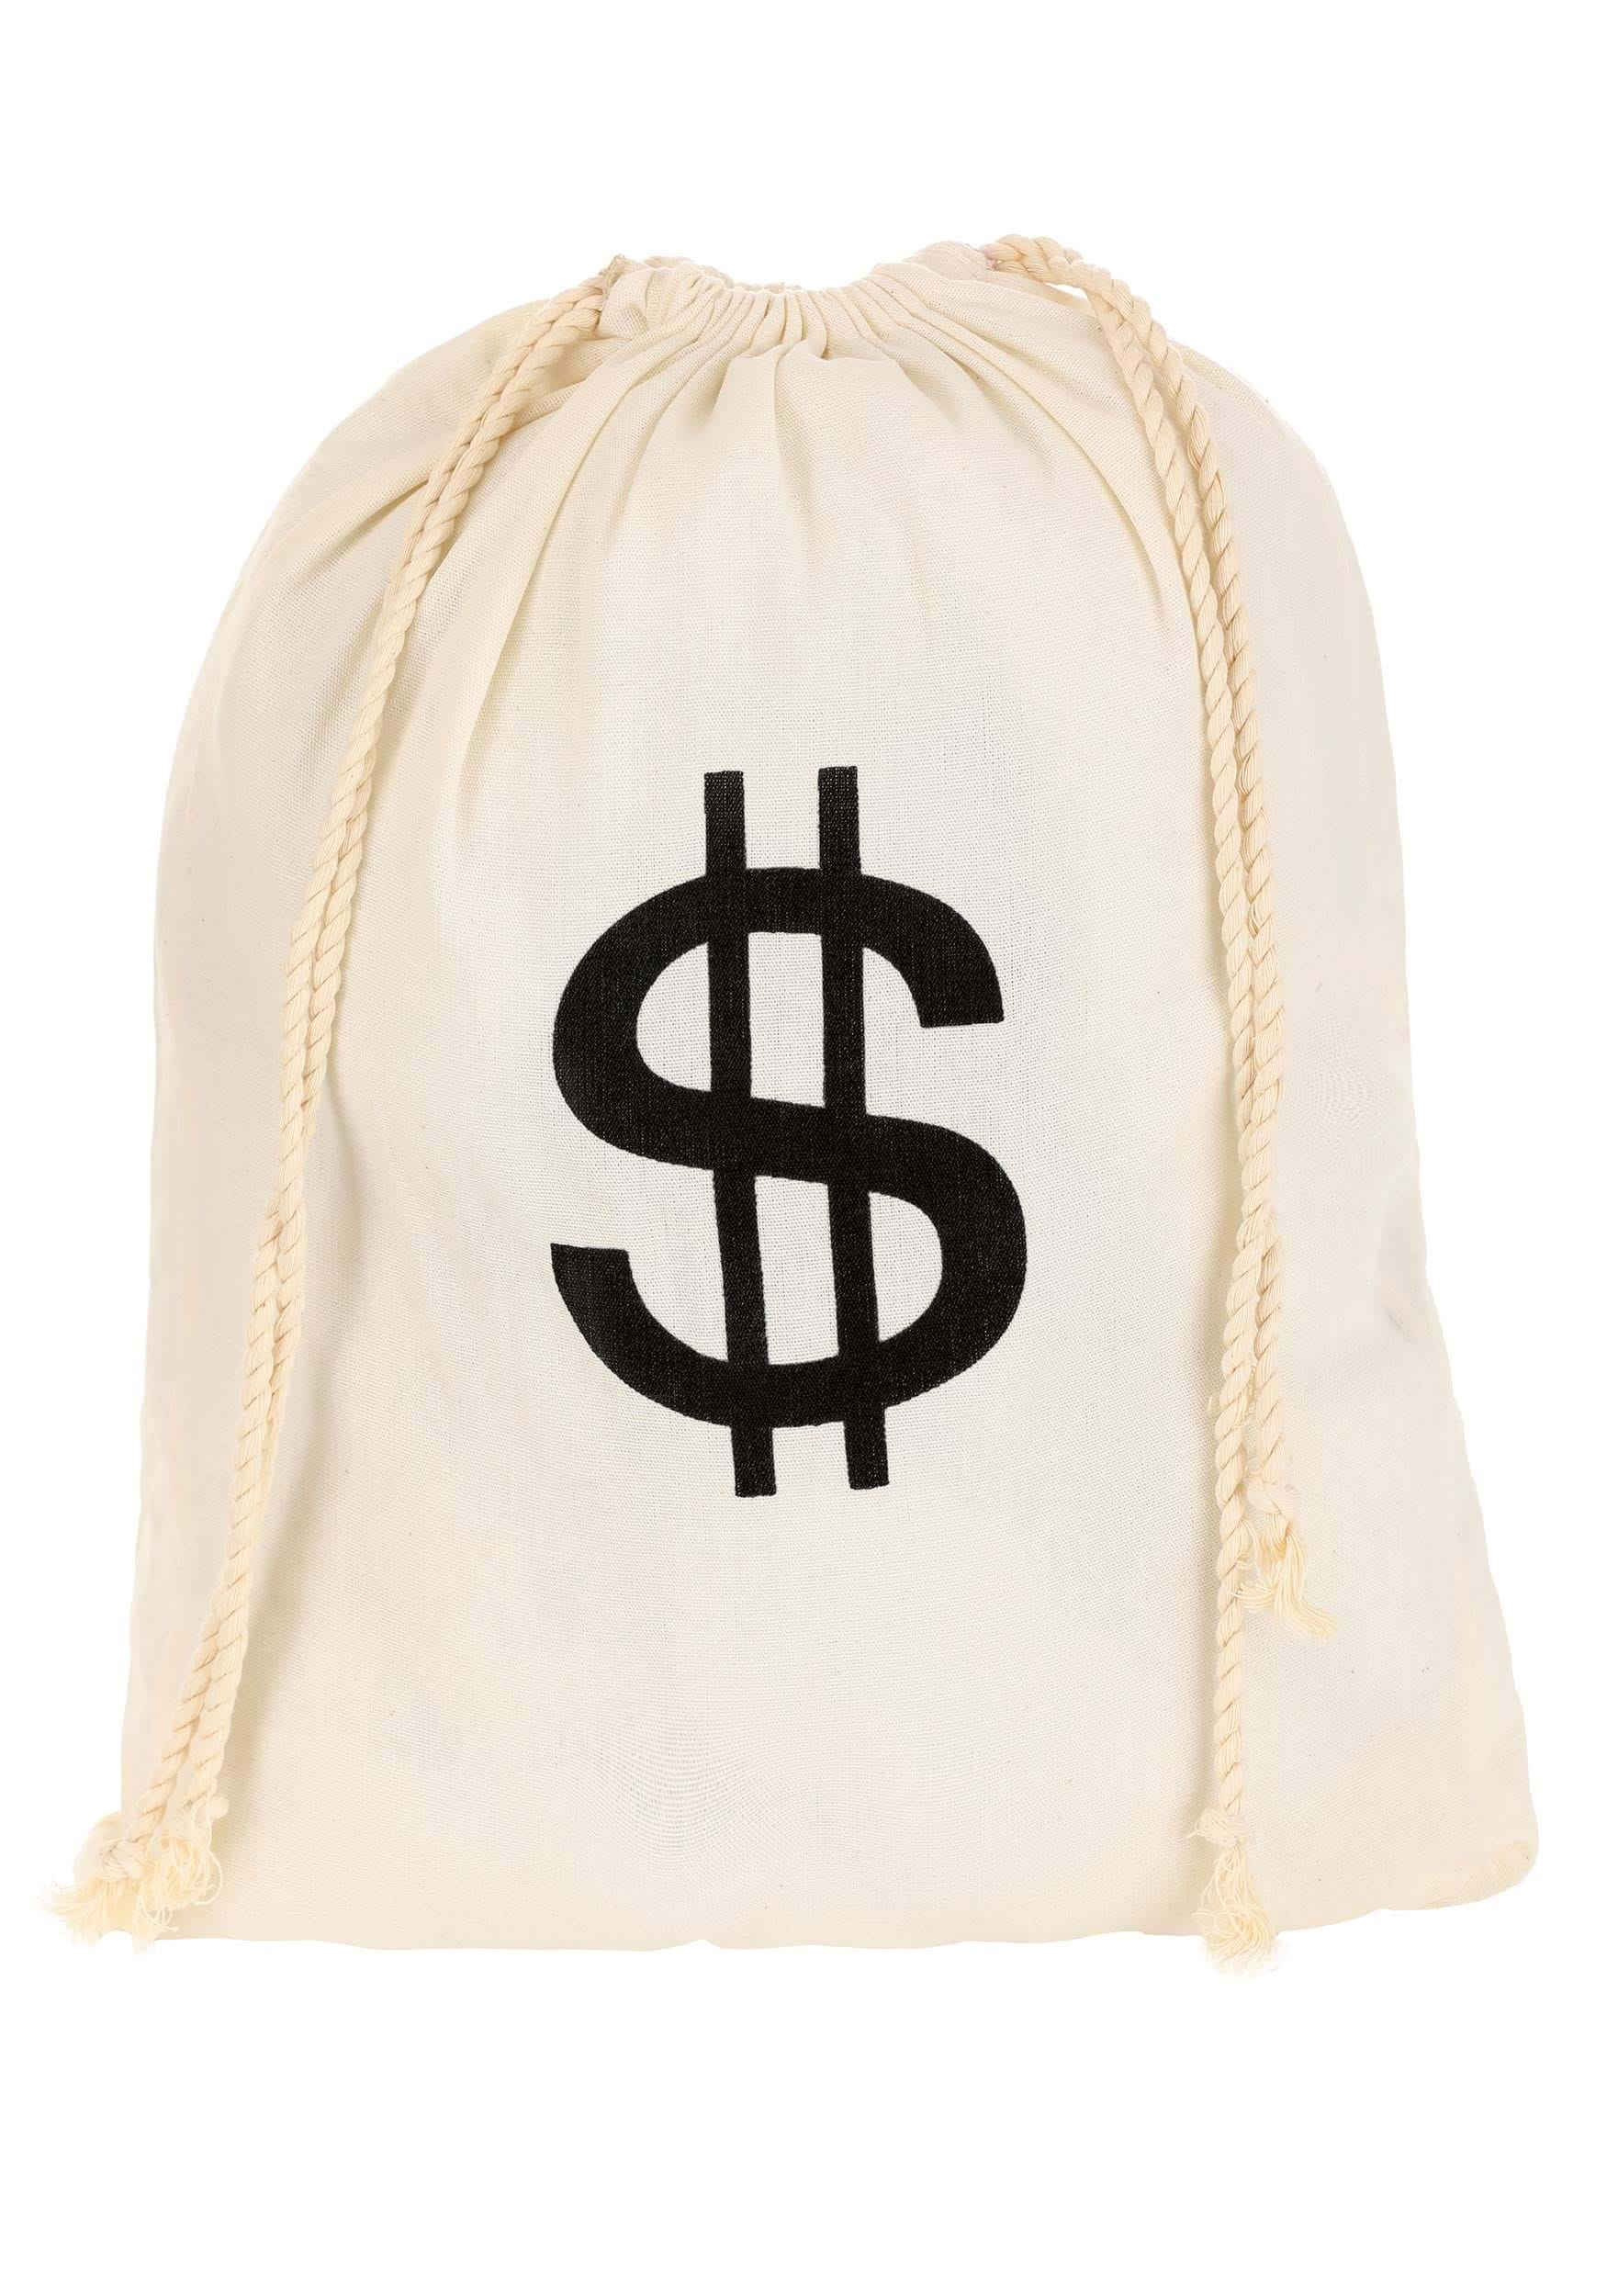 Bank Robber Money Bag Accessory Prop , Costume Accessories